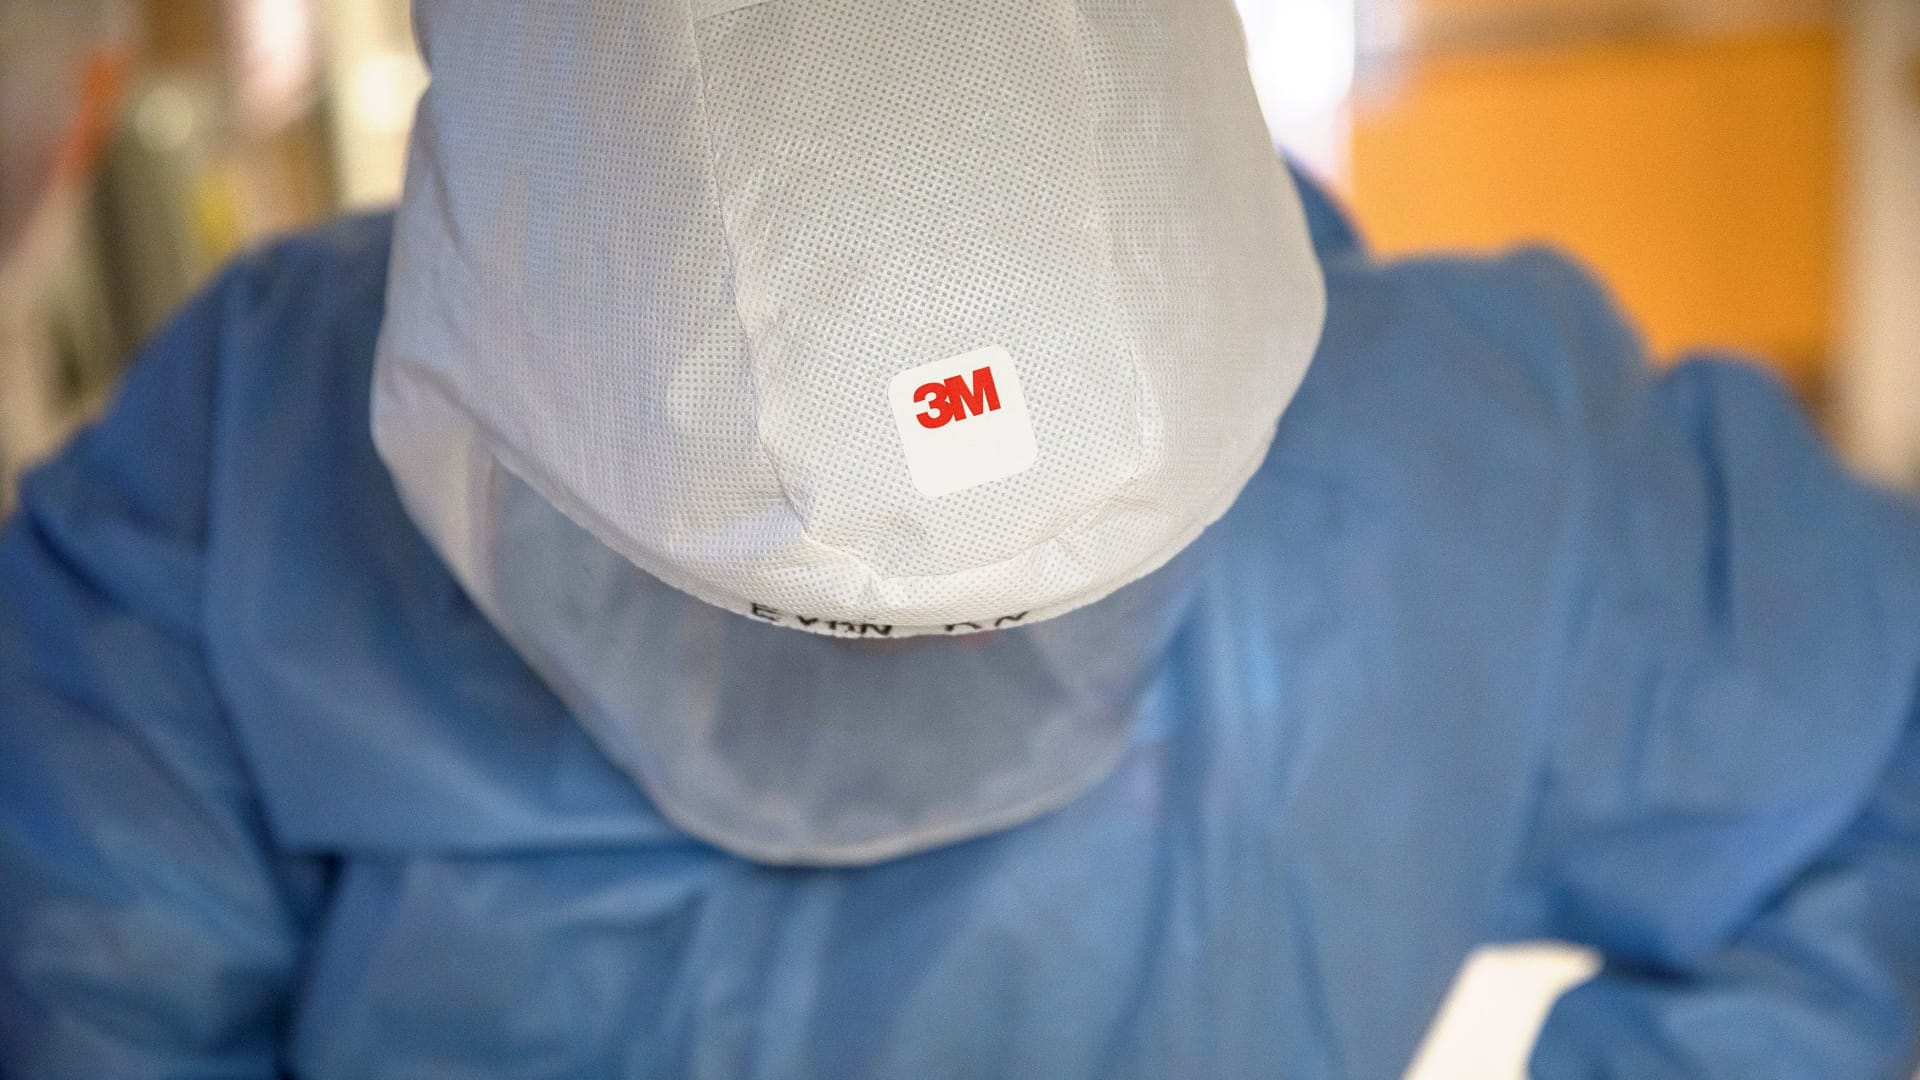 3M will spin off its health care business into a new public company